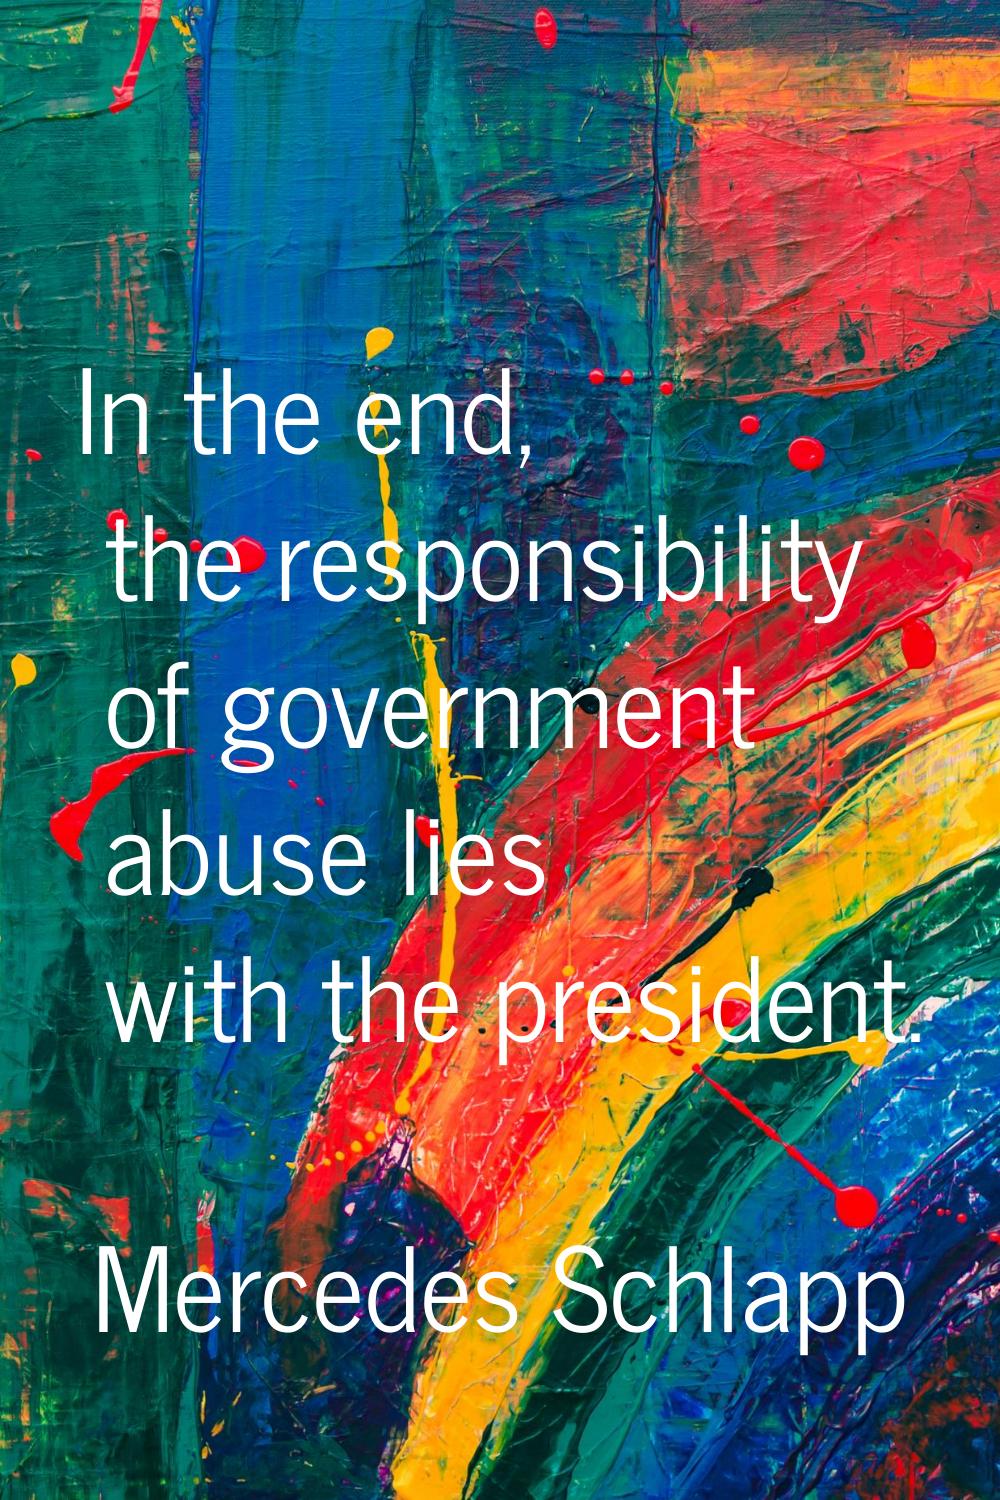 In the end, the responsibility of government abuse lies with the president.